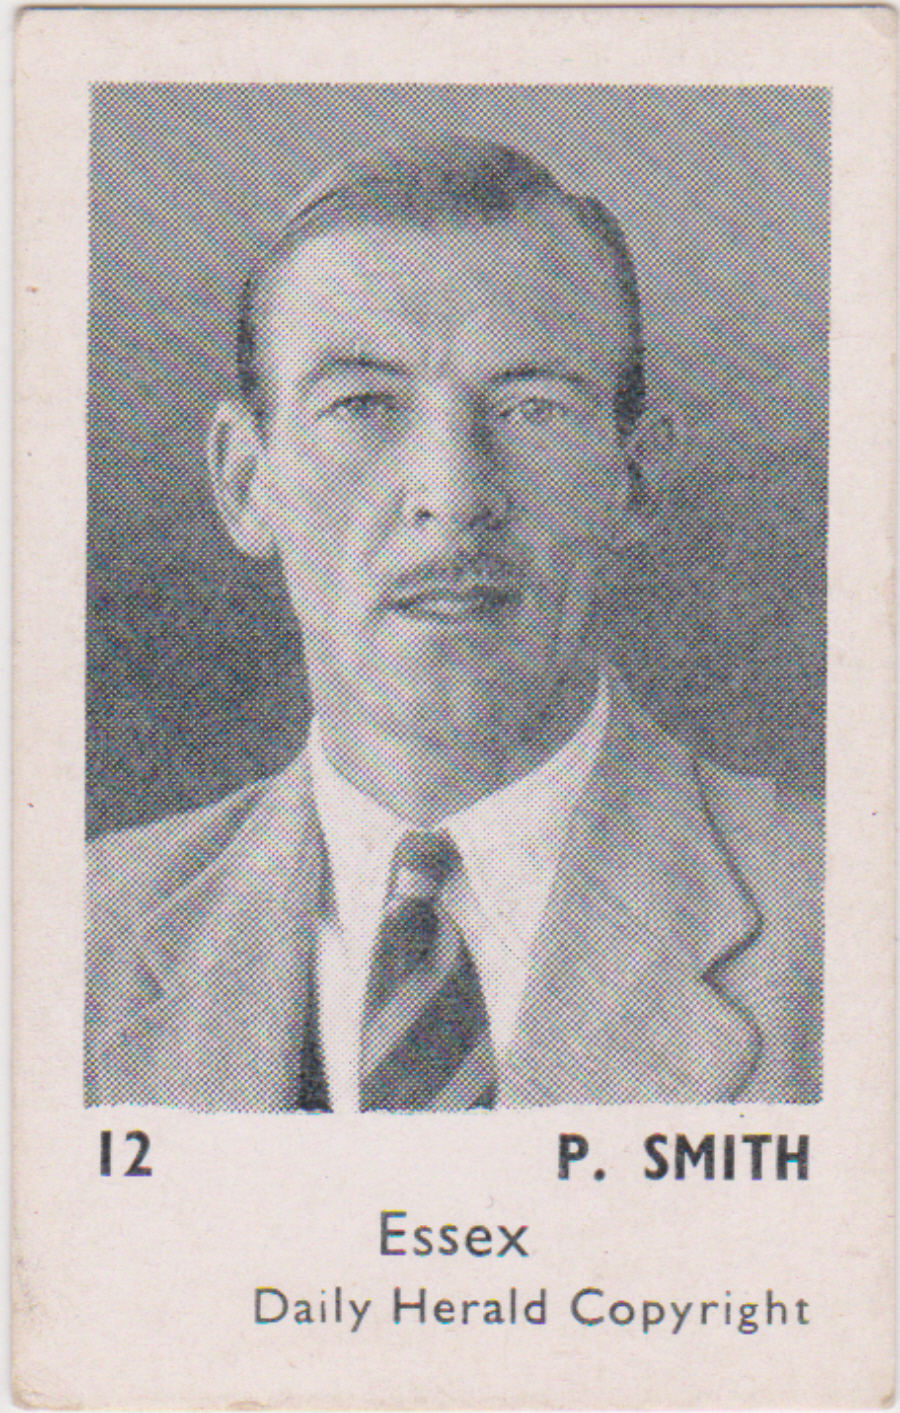 Daily Herald Cricketers No12 P Smith